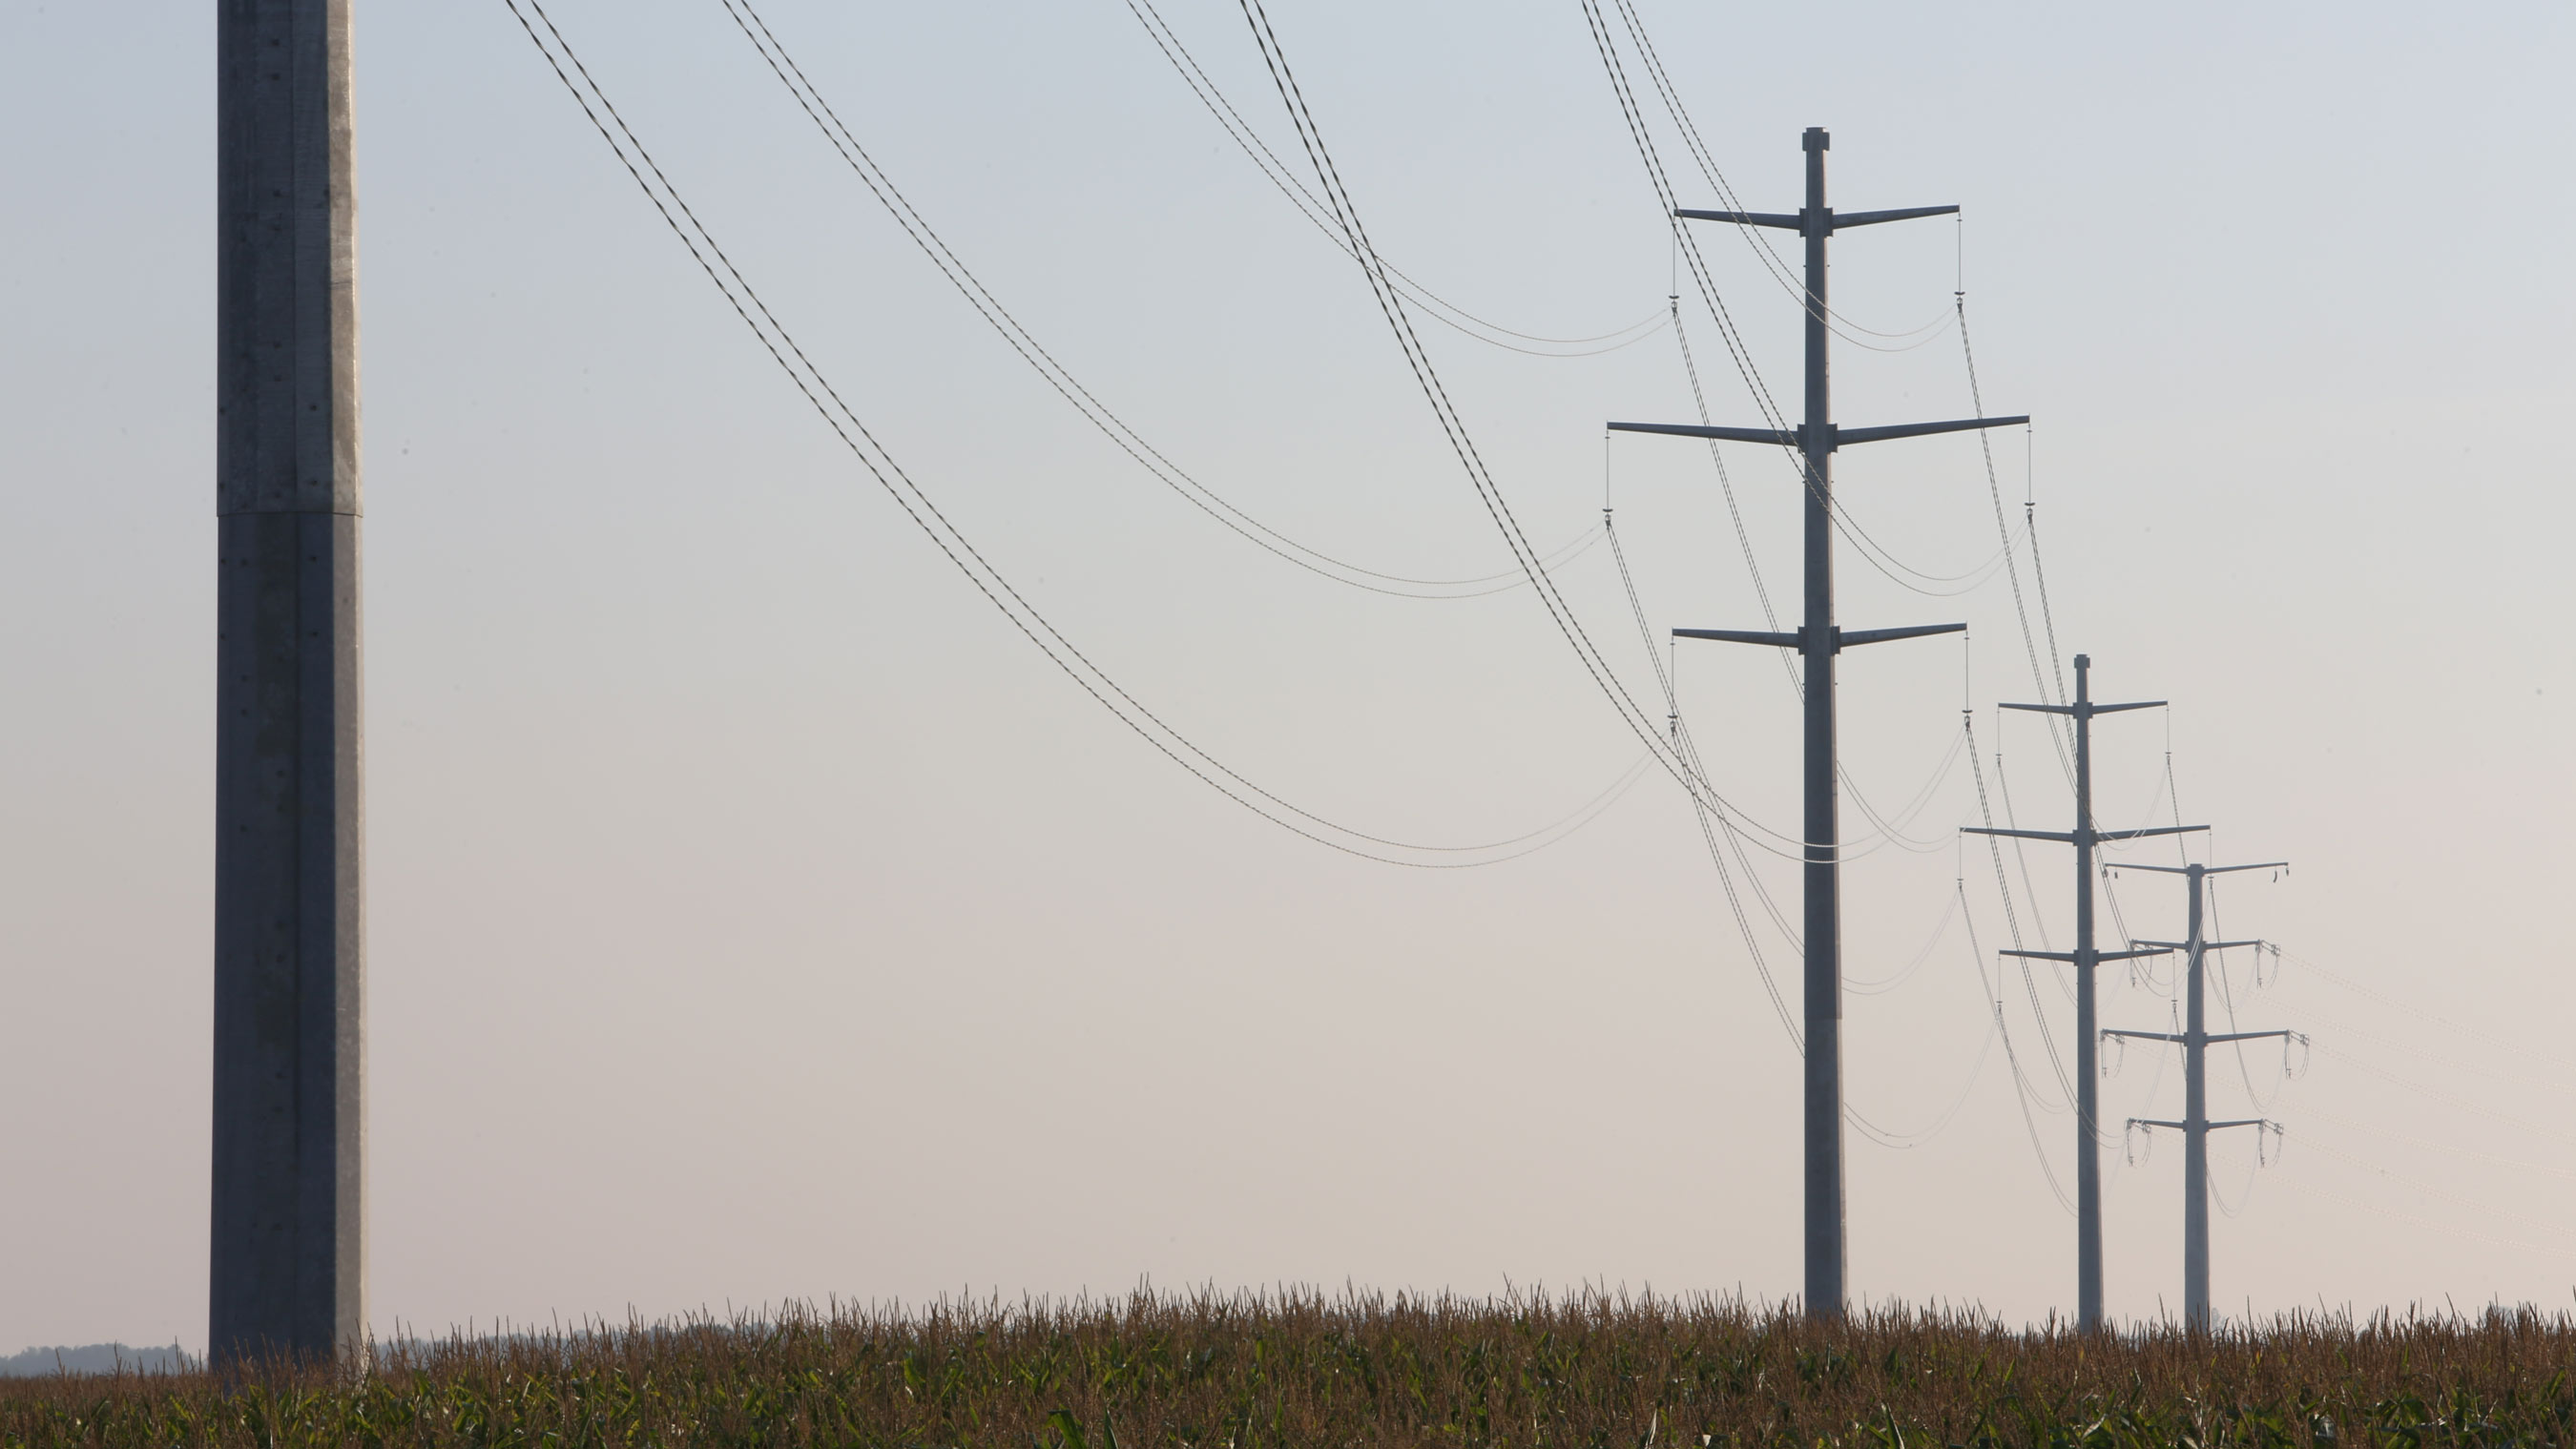 The Thumb Loop transmission project consists of 789 steel monopoles and 32 steel lattice towers and 1,680 miles of wires.